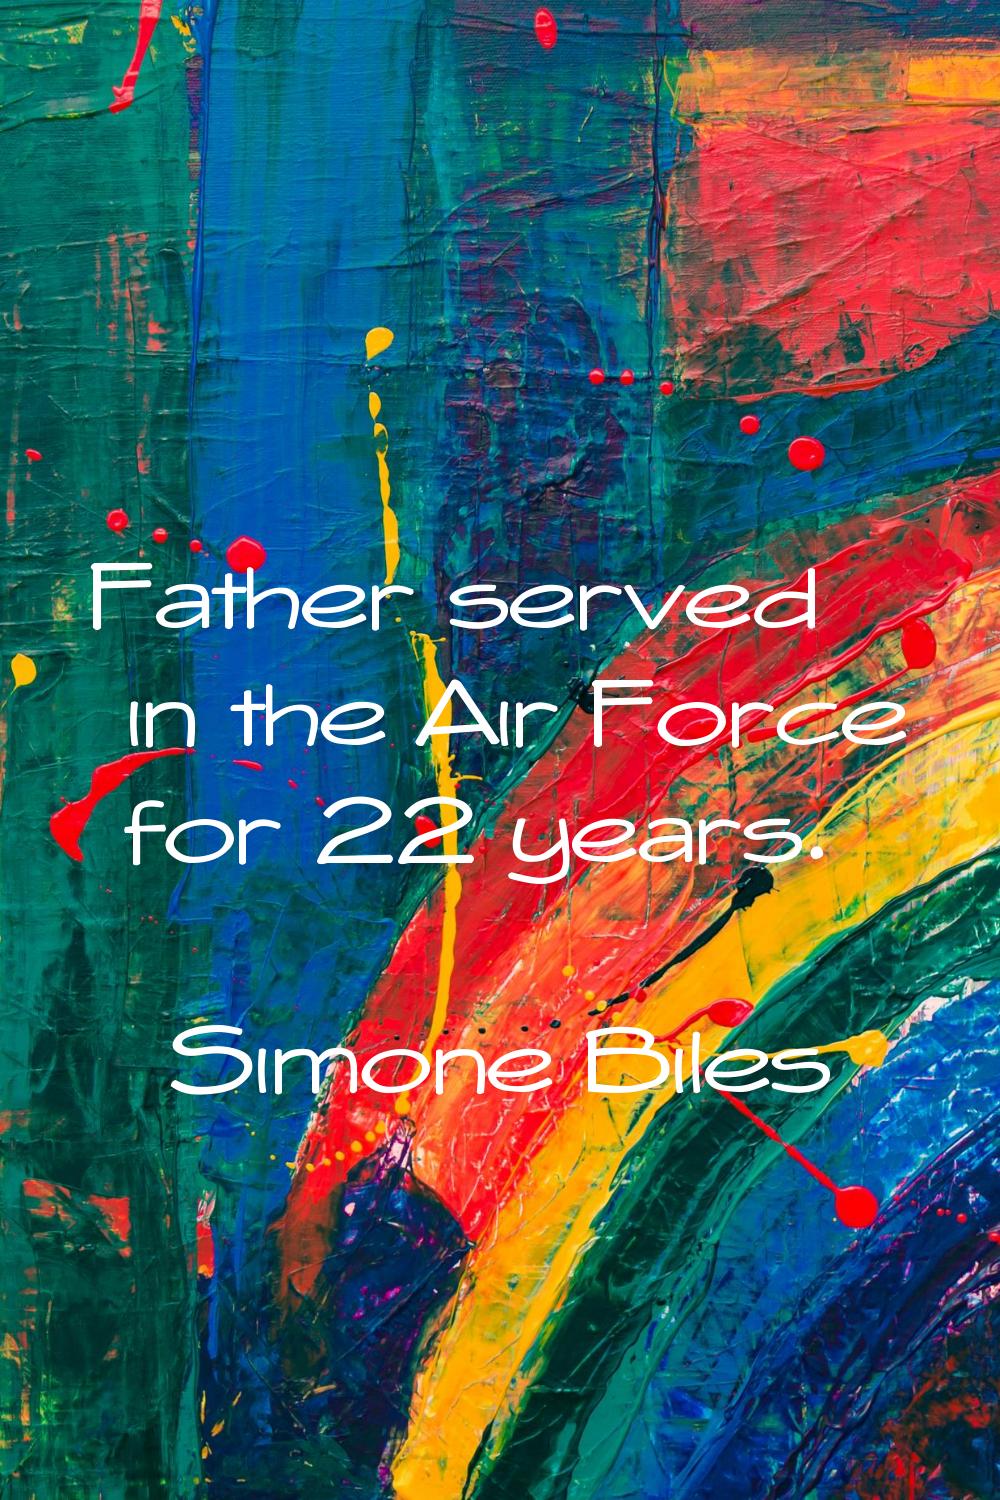 Father served in the Air Force for 22 years.